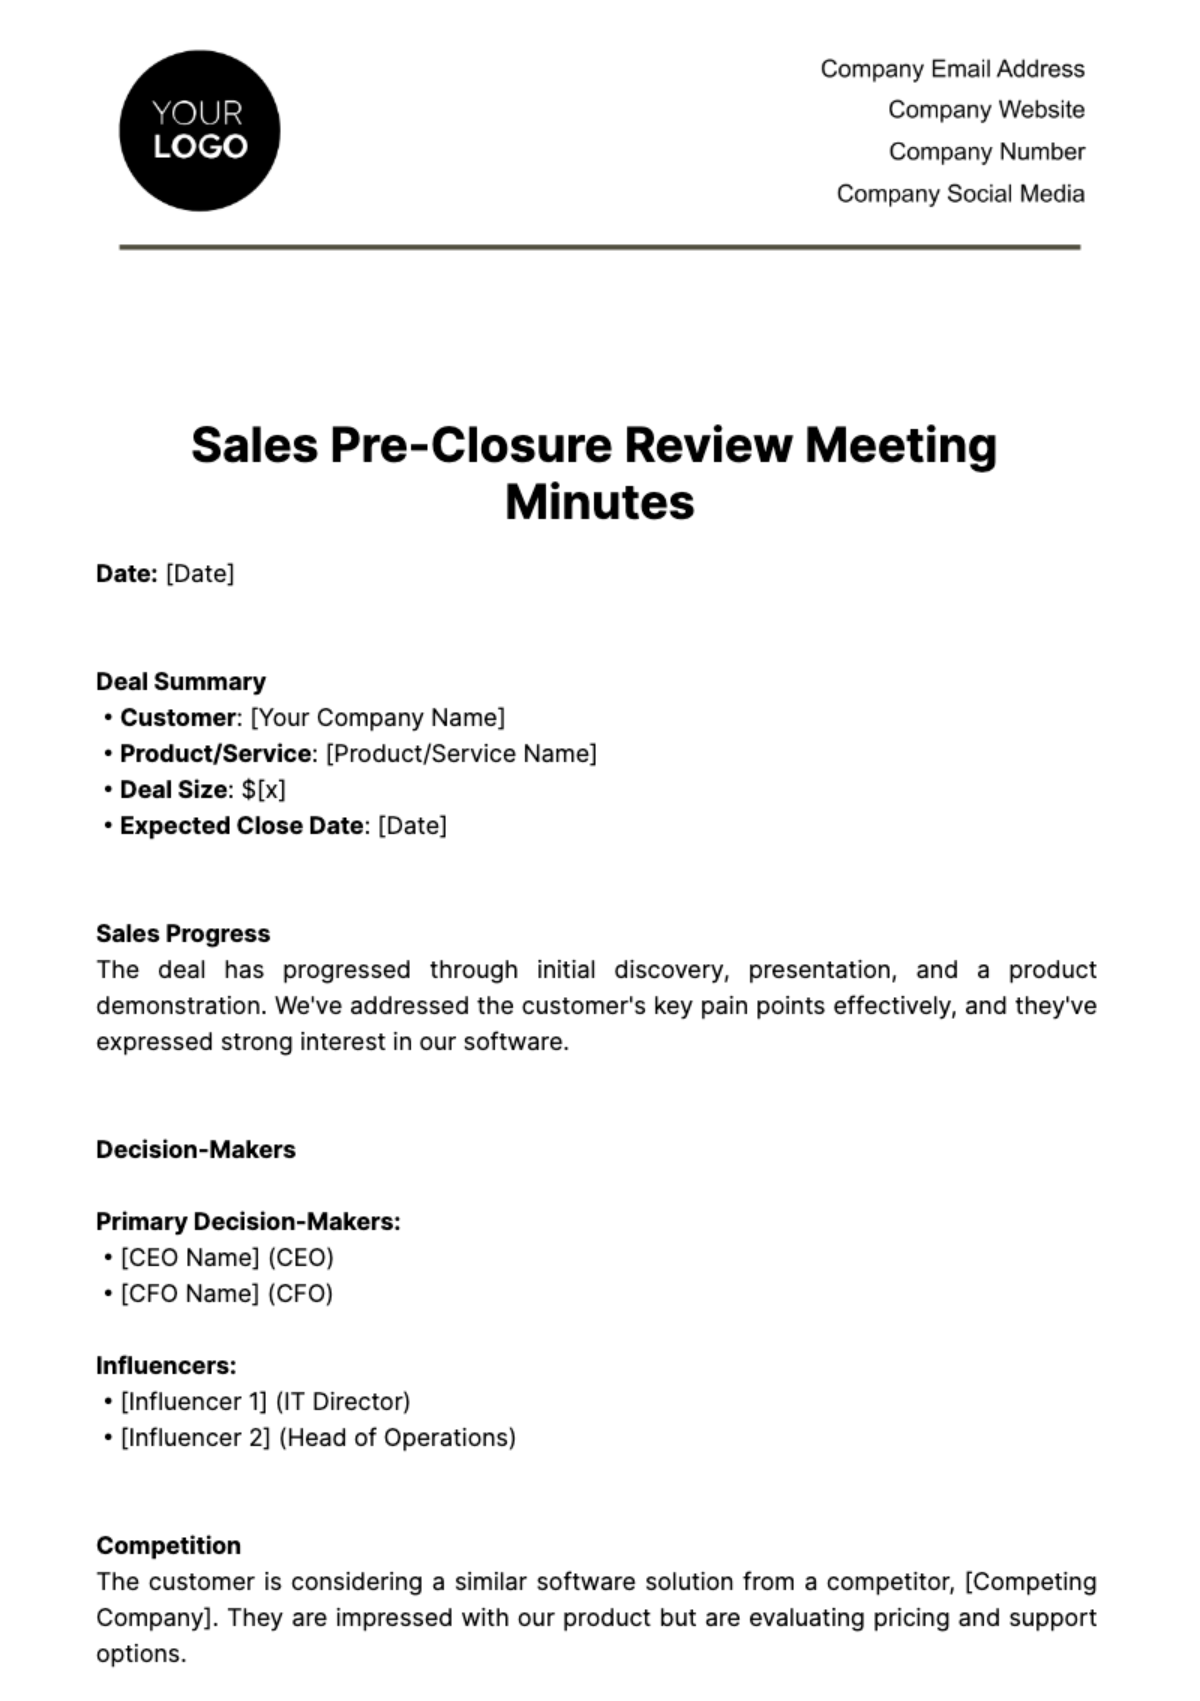 Free Sales Minute for Pre-Closure Review Meeting Template